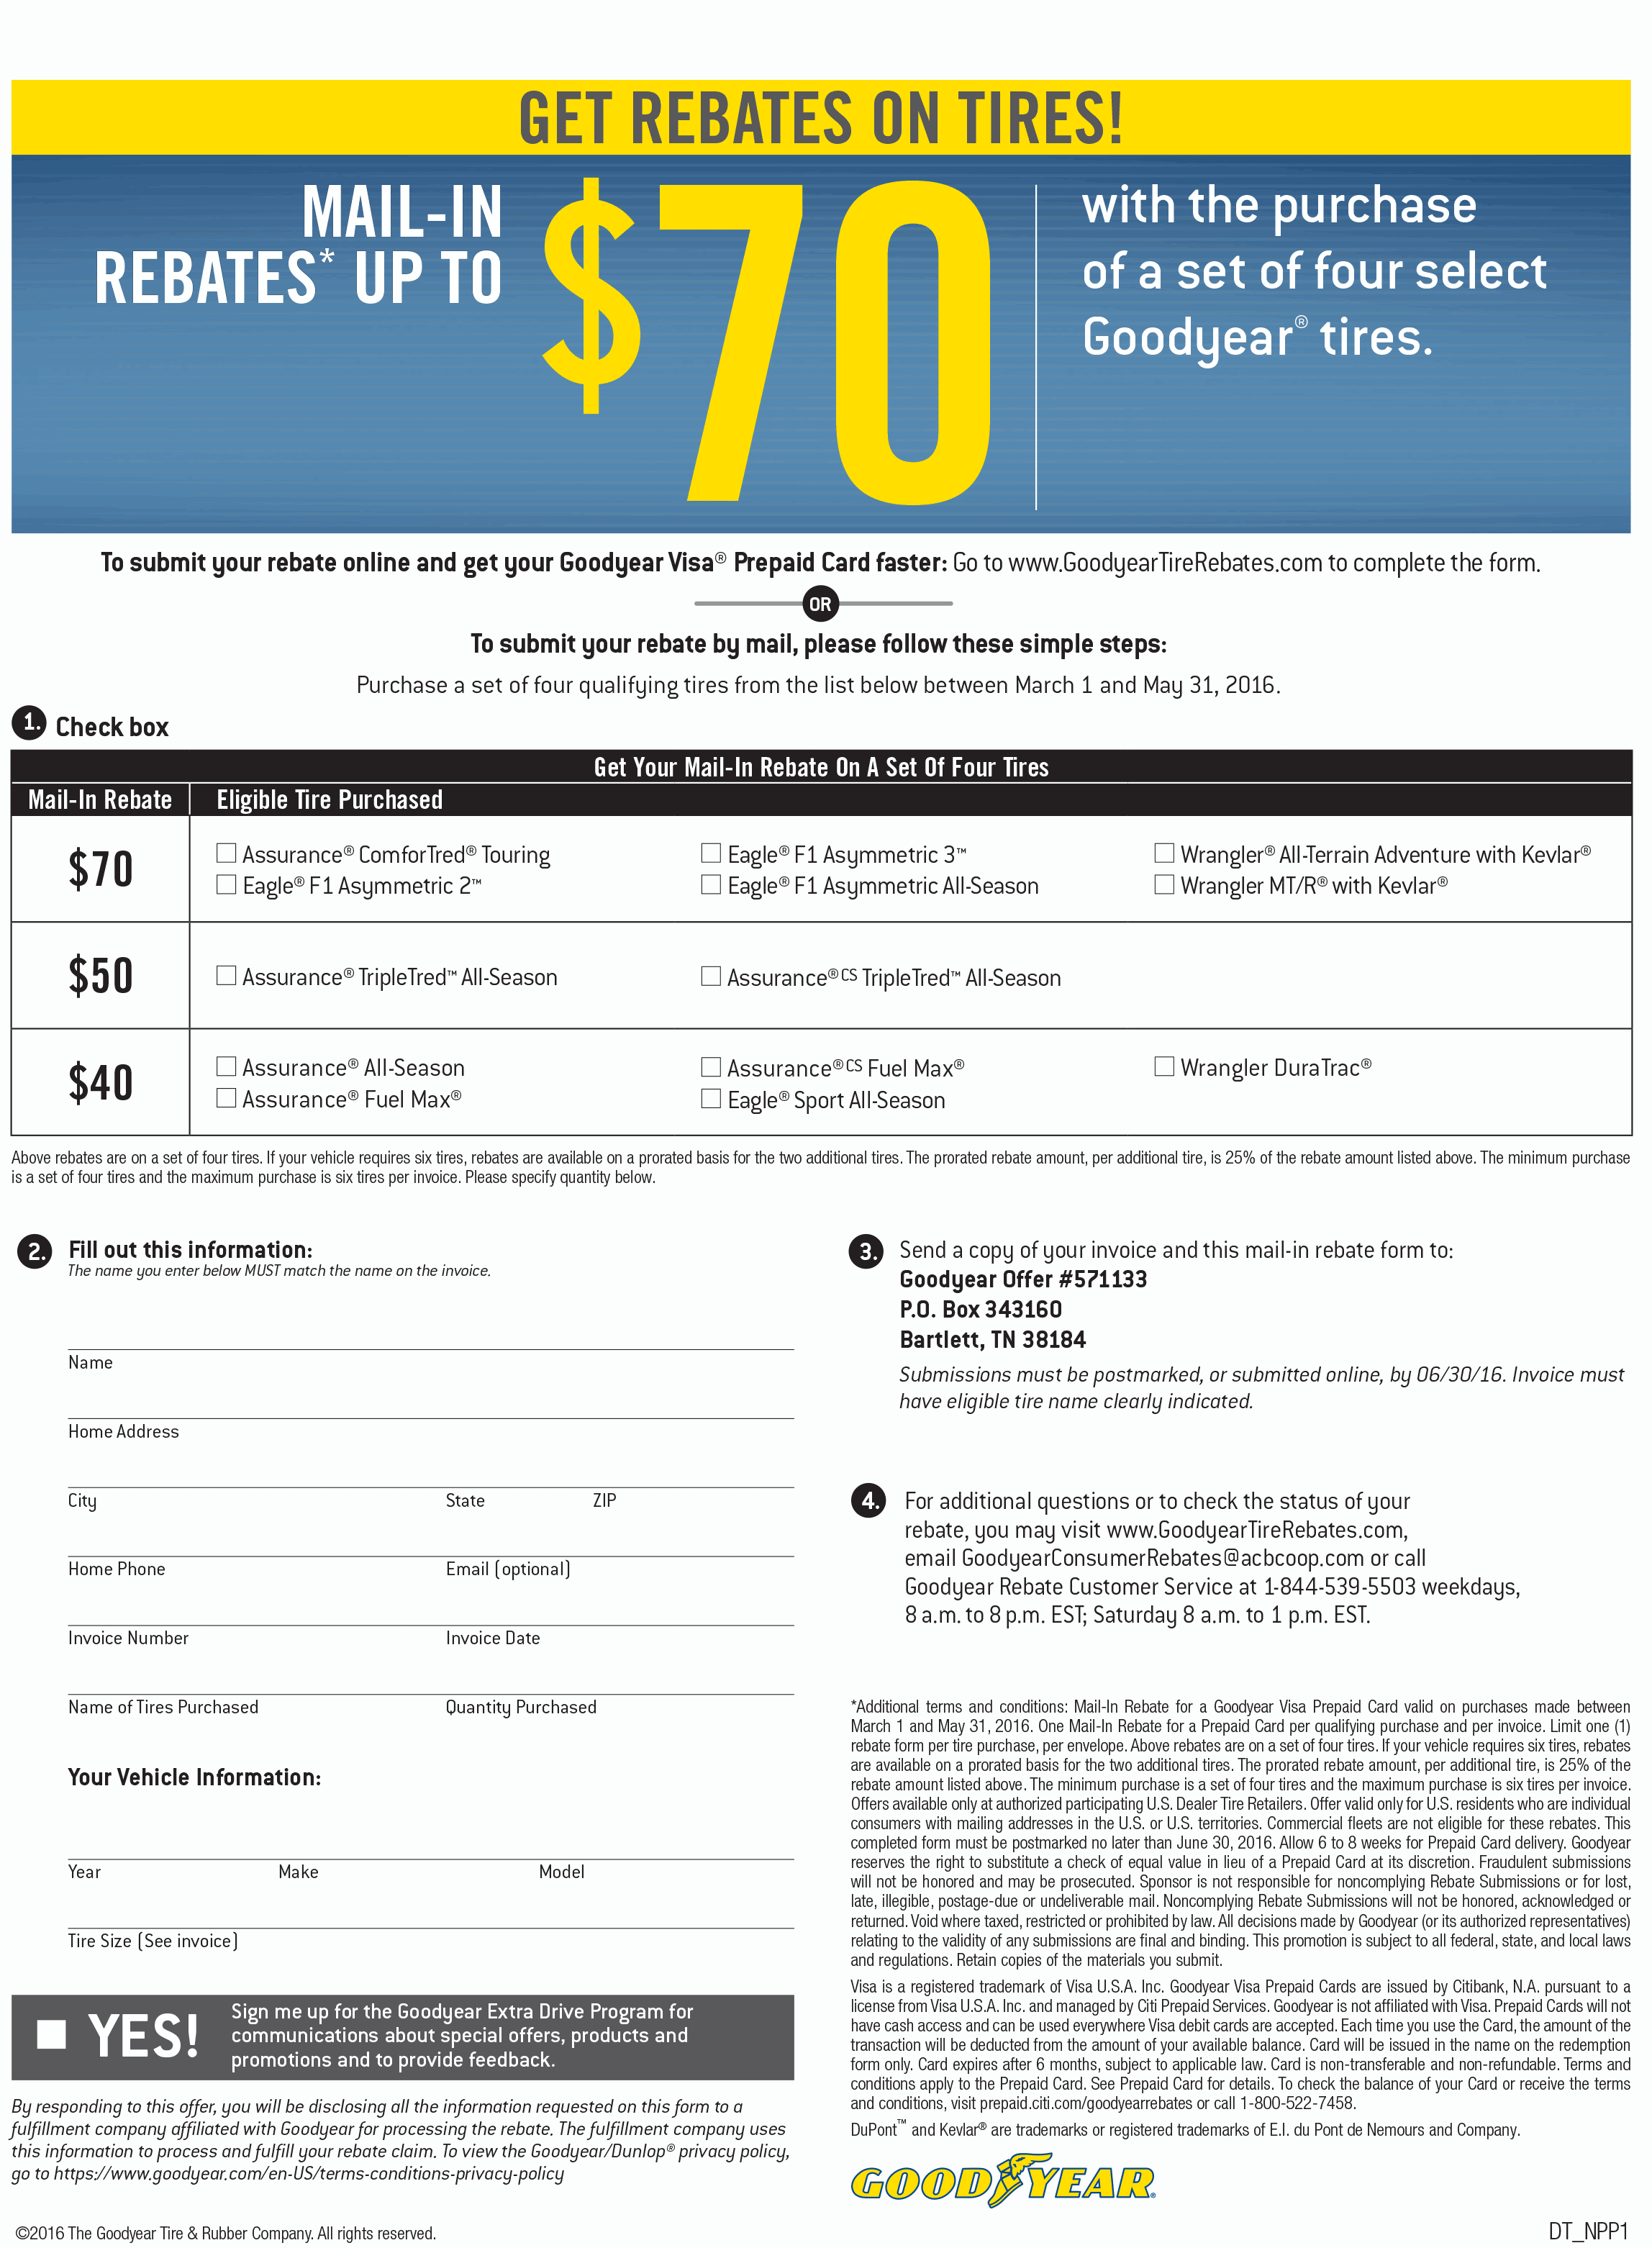 Canadian Tire Rebate Form